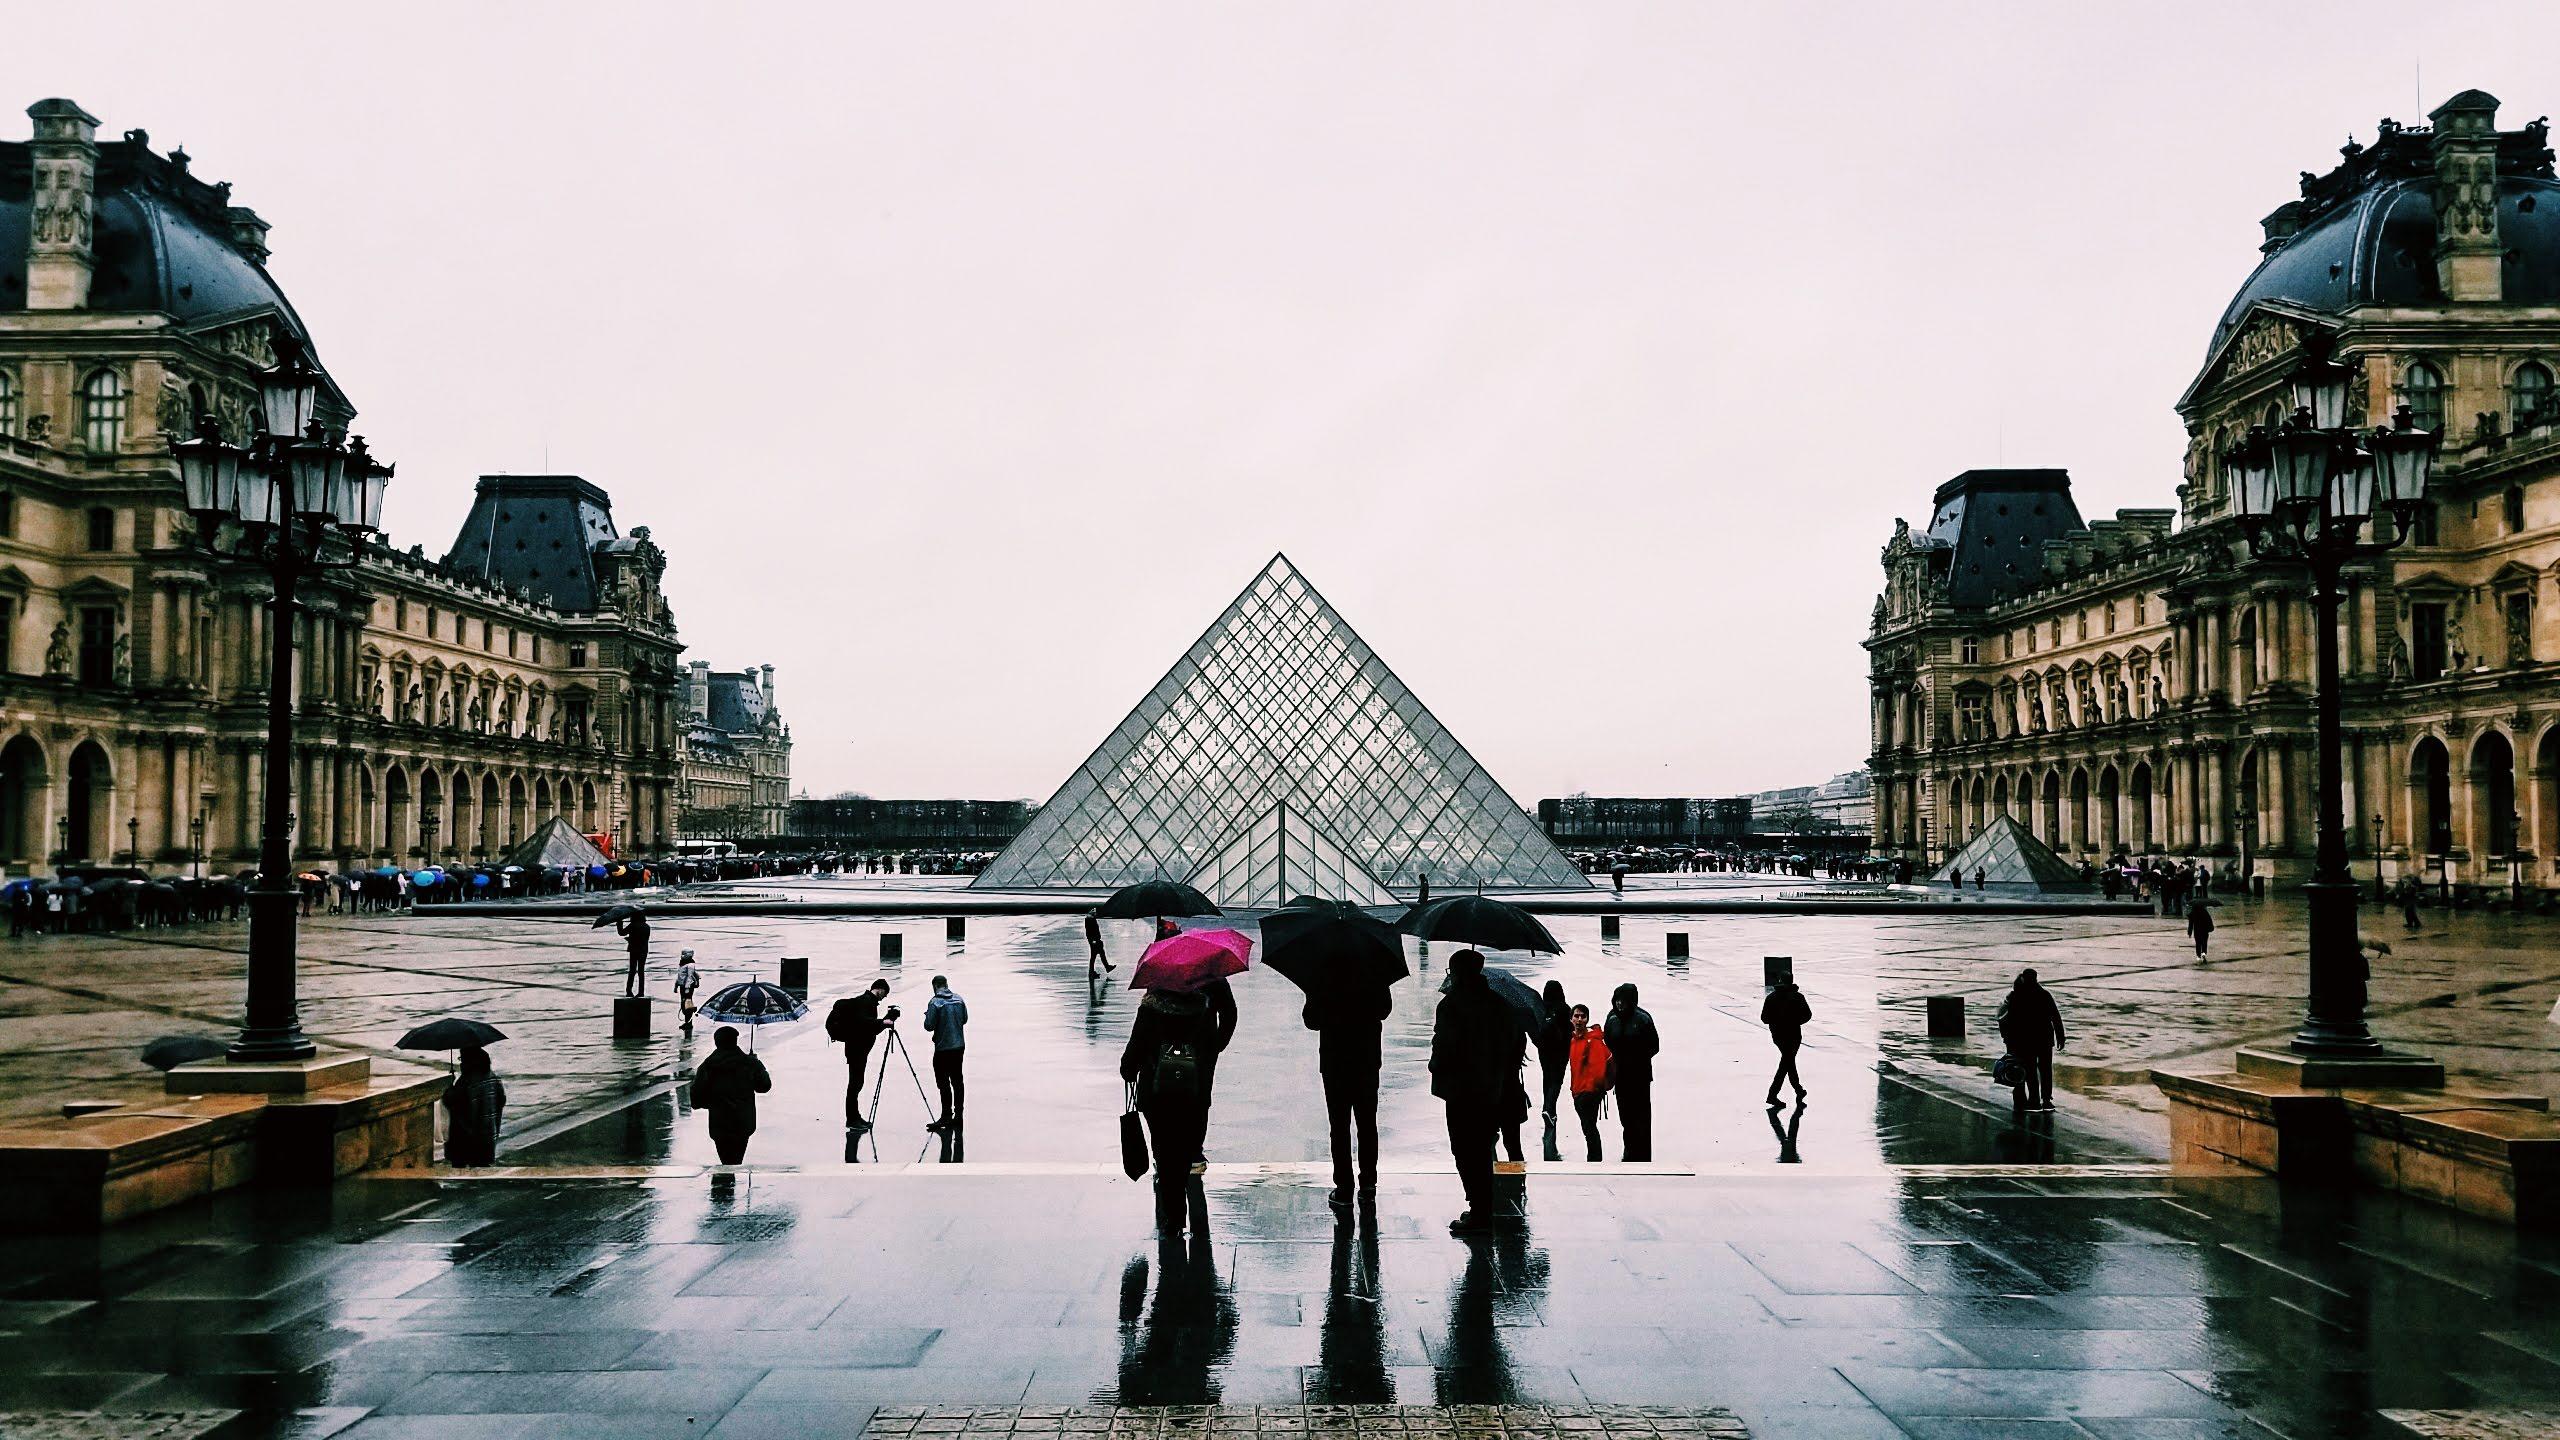 Tourists with umbrellas looking at the Pyramids of the Louvre on a rainy day.